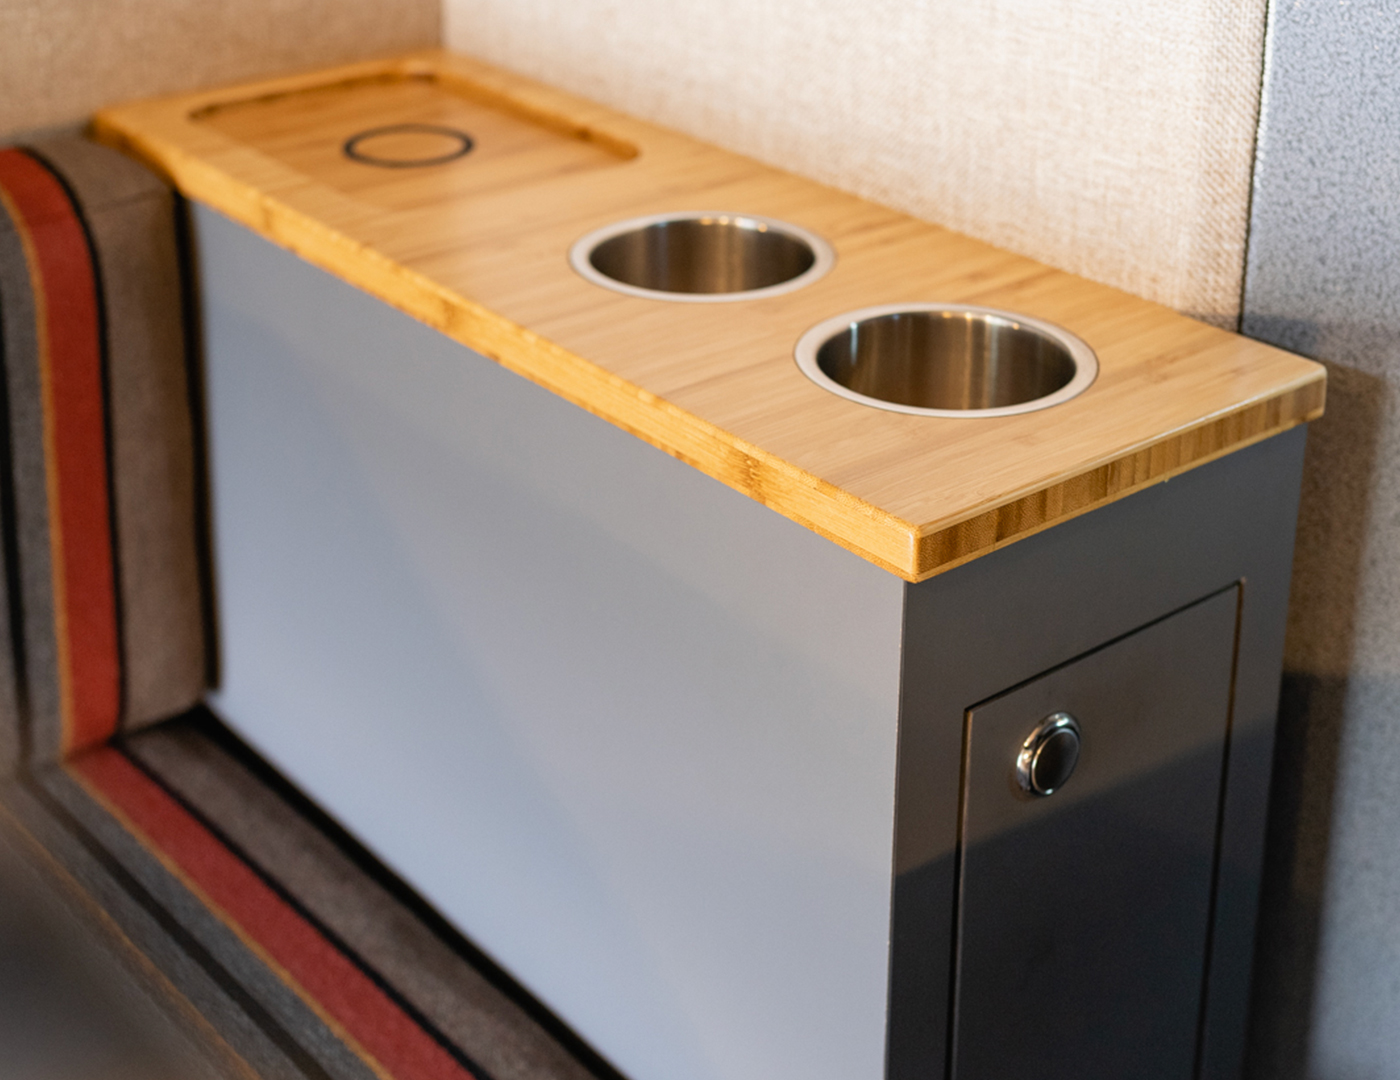 Thin storage box with bamboo and metal designated cup holders next to custom upholstered seat